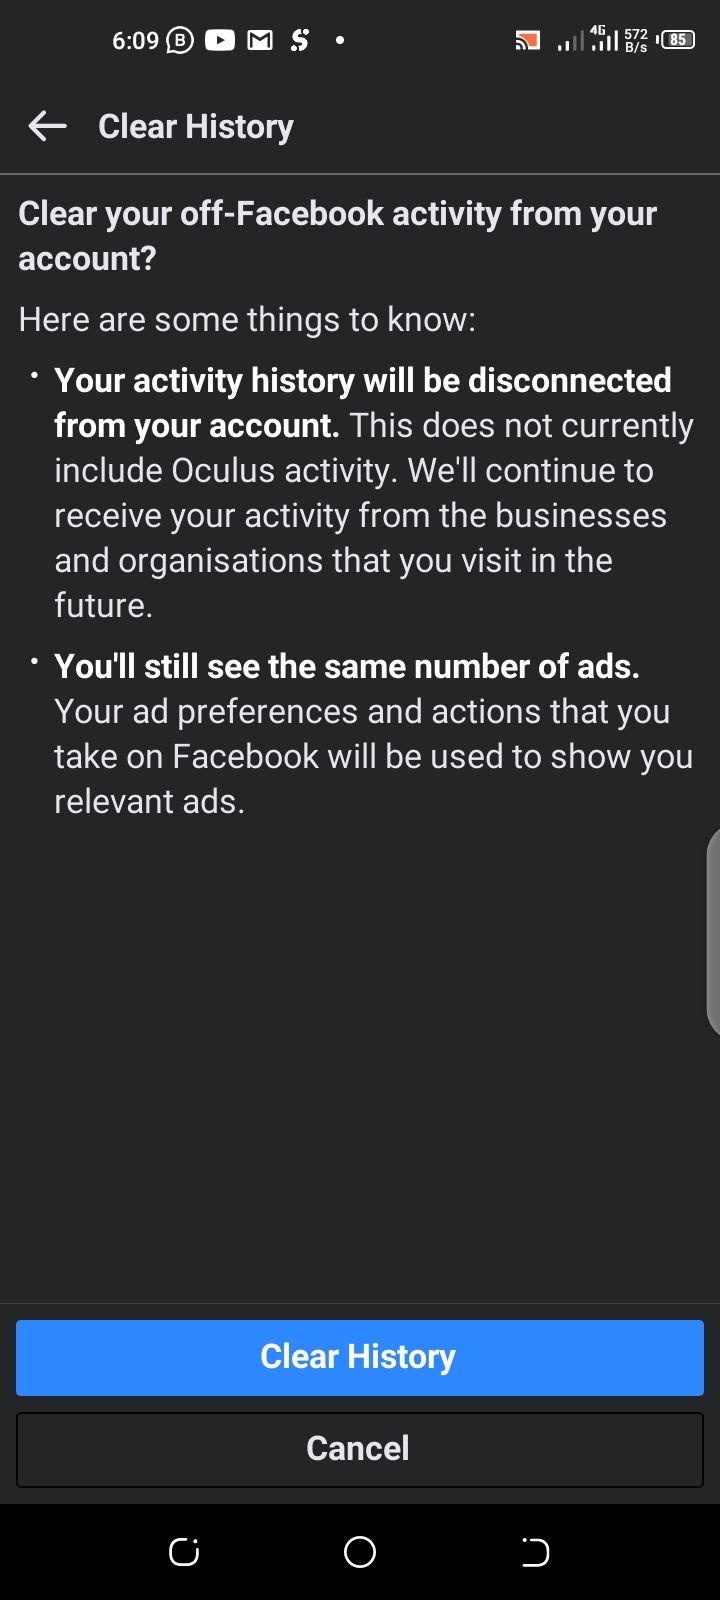 Clear your off-Facebook activity details 